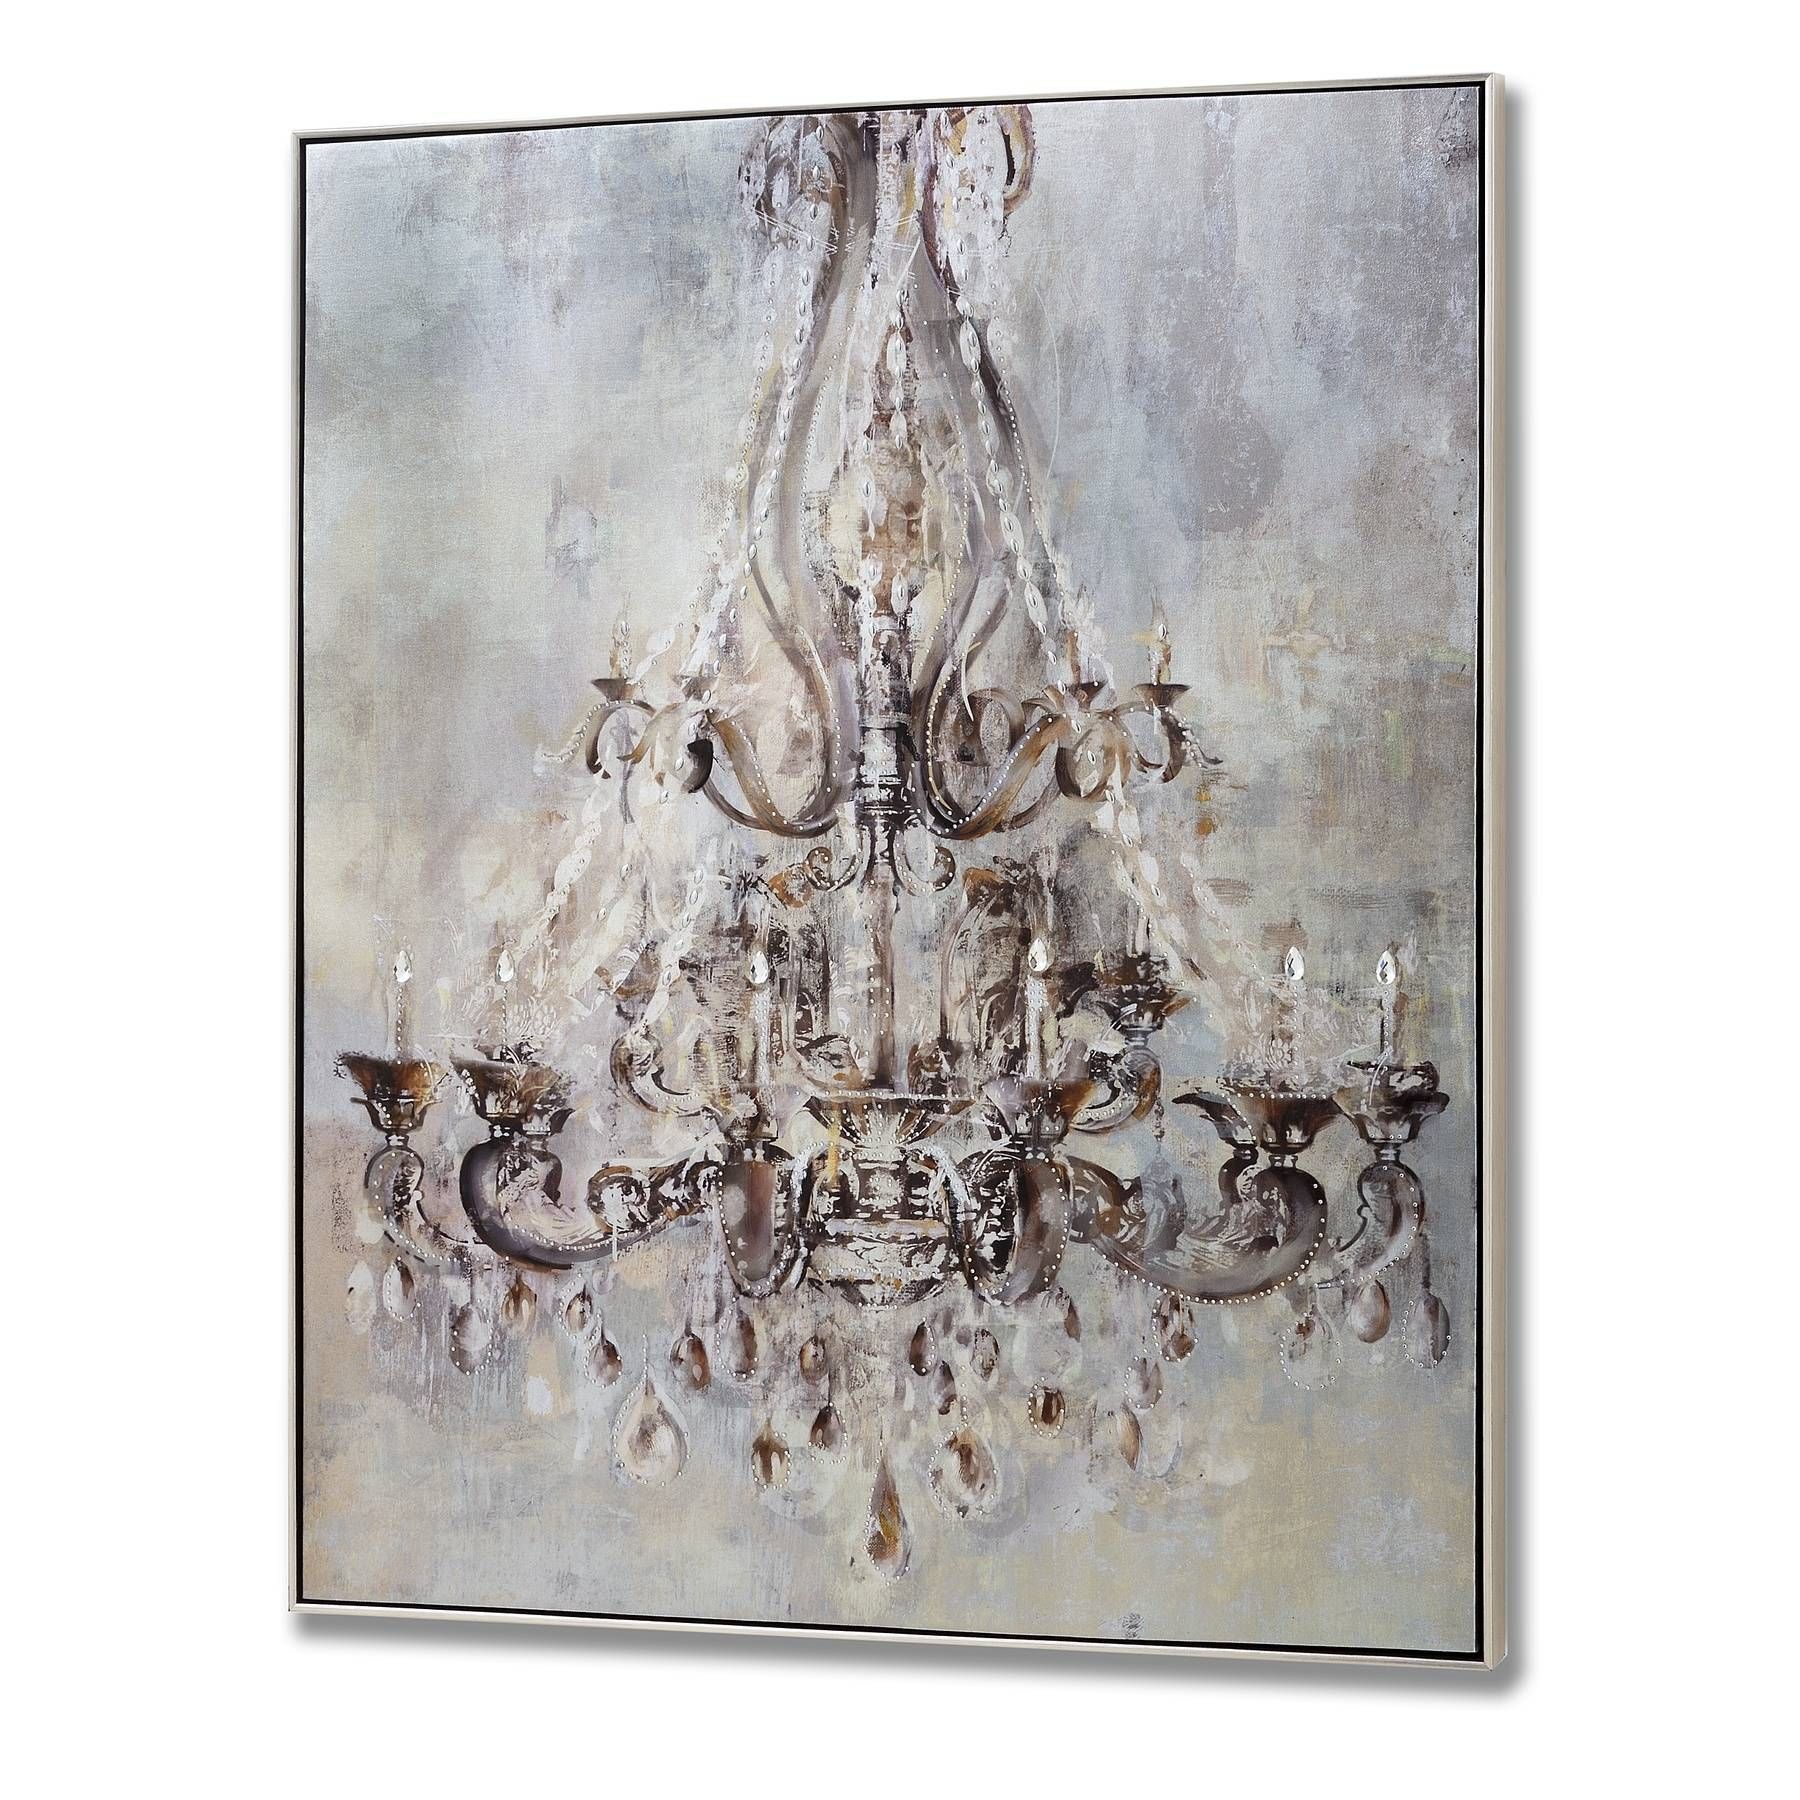 Framed Wall Art Ideas For Living Room Crystal Chandelier In High Throughout Latest Metal Wall Art With Crystals (View 5 of 20)